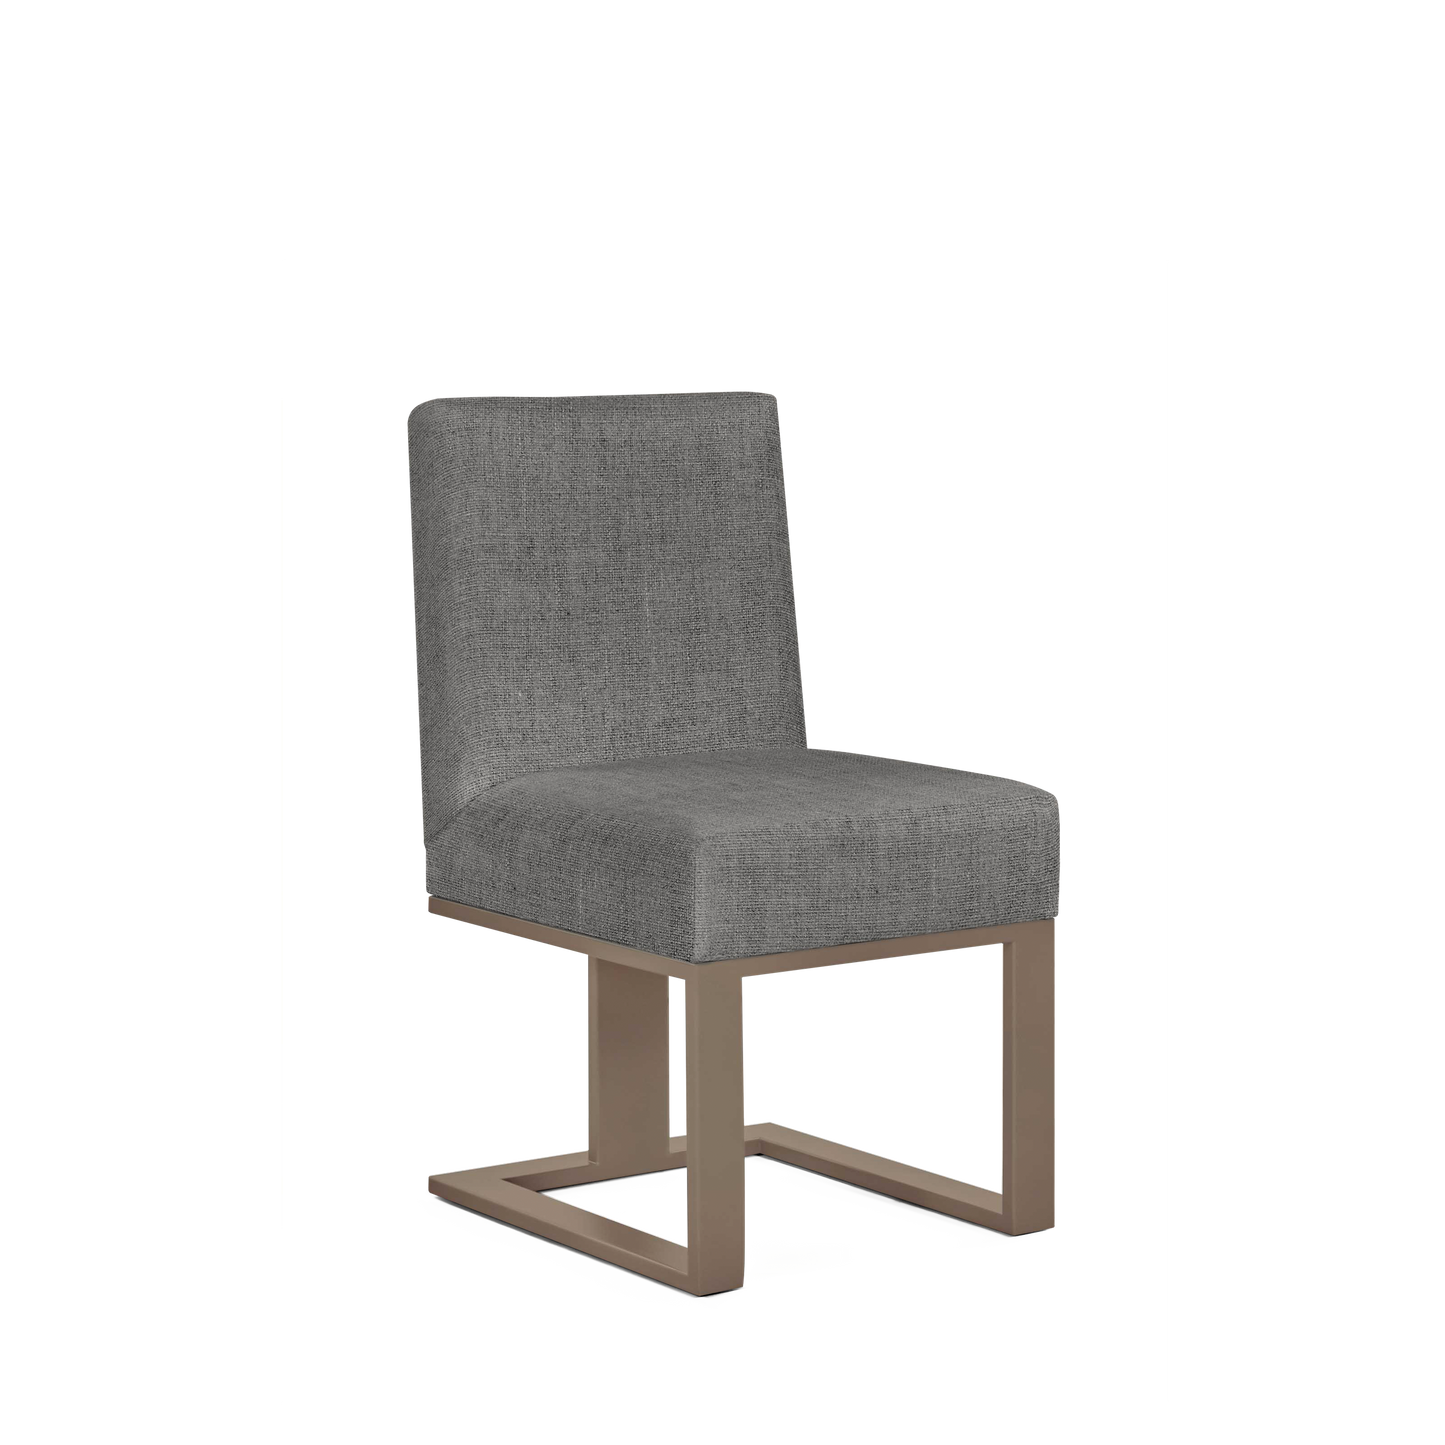 Len chair with Rocco dark grey textile and champagne wood legs 